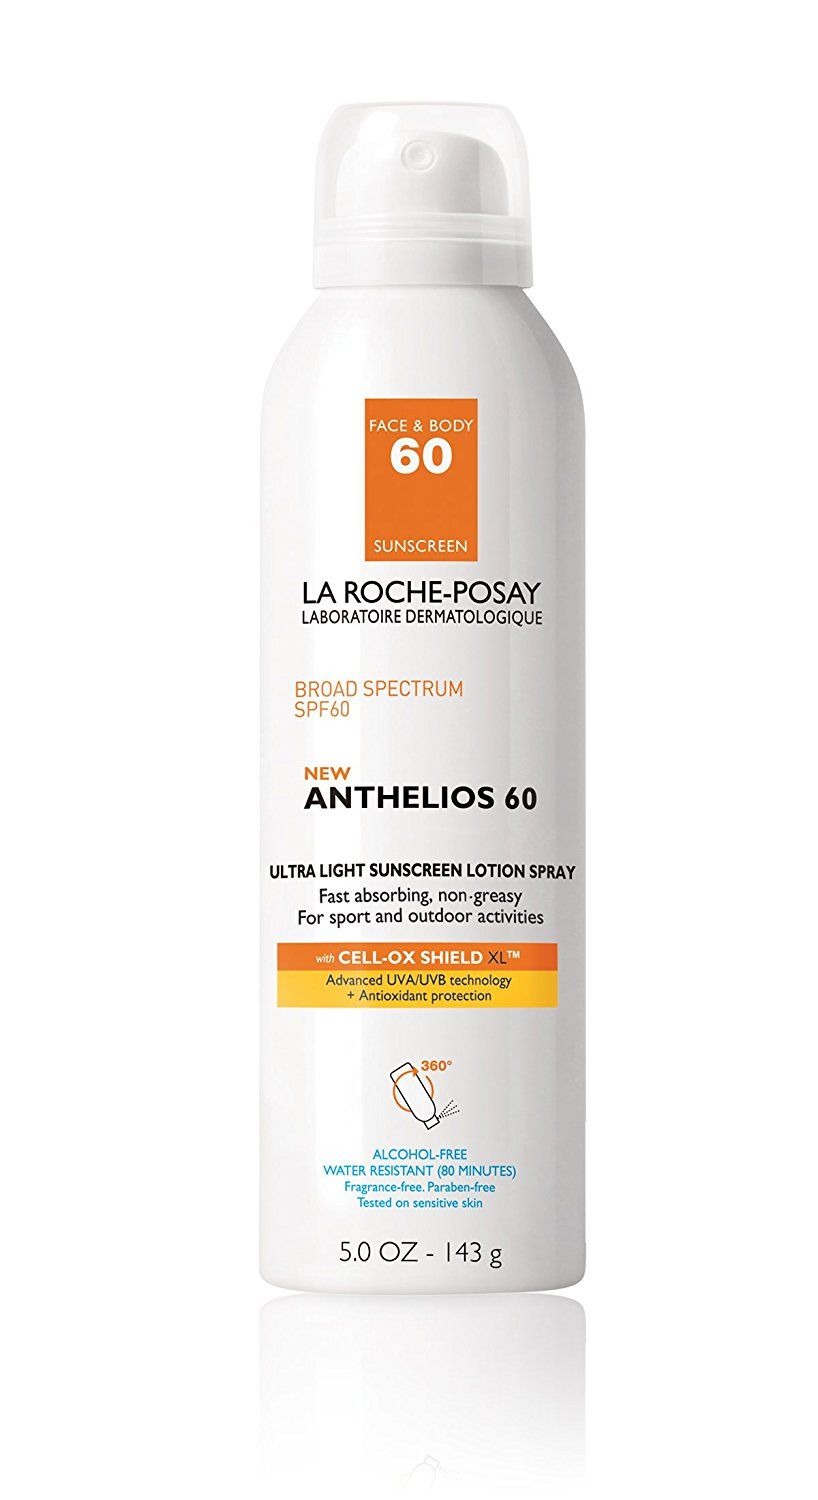 Xịt chống nắng La Roche-Posay Anthelios Lotion Spray Sunscreen SPF 60.